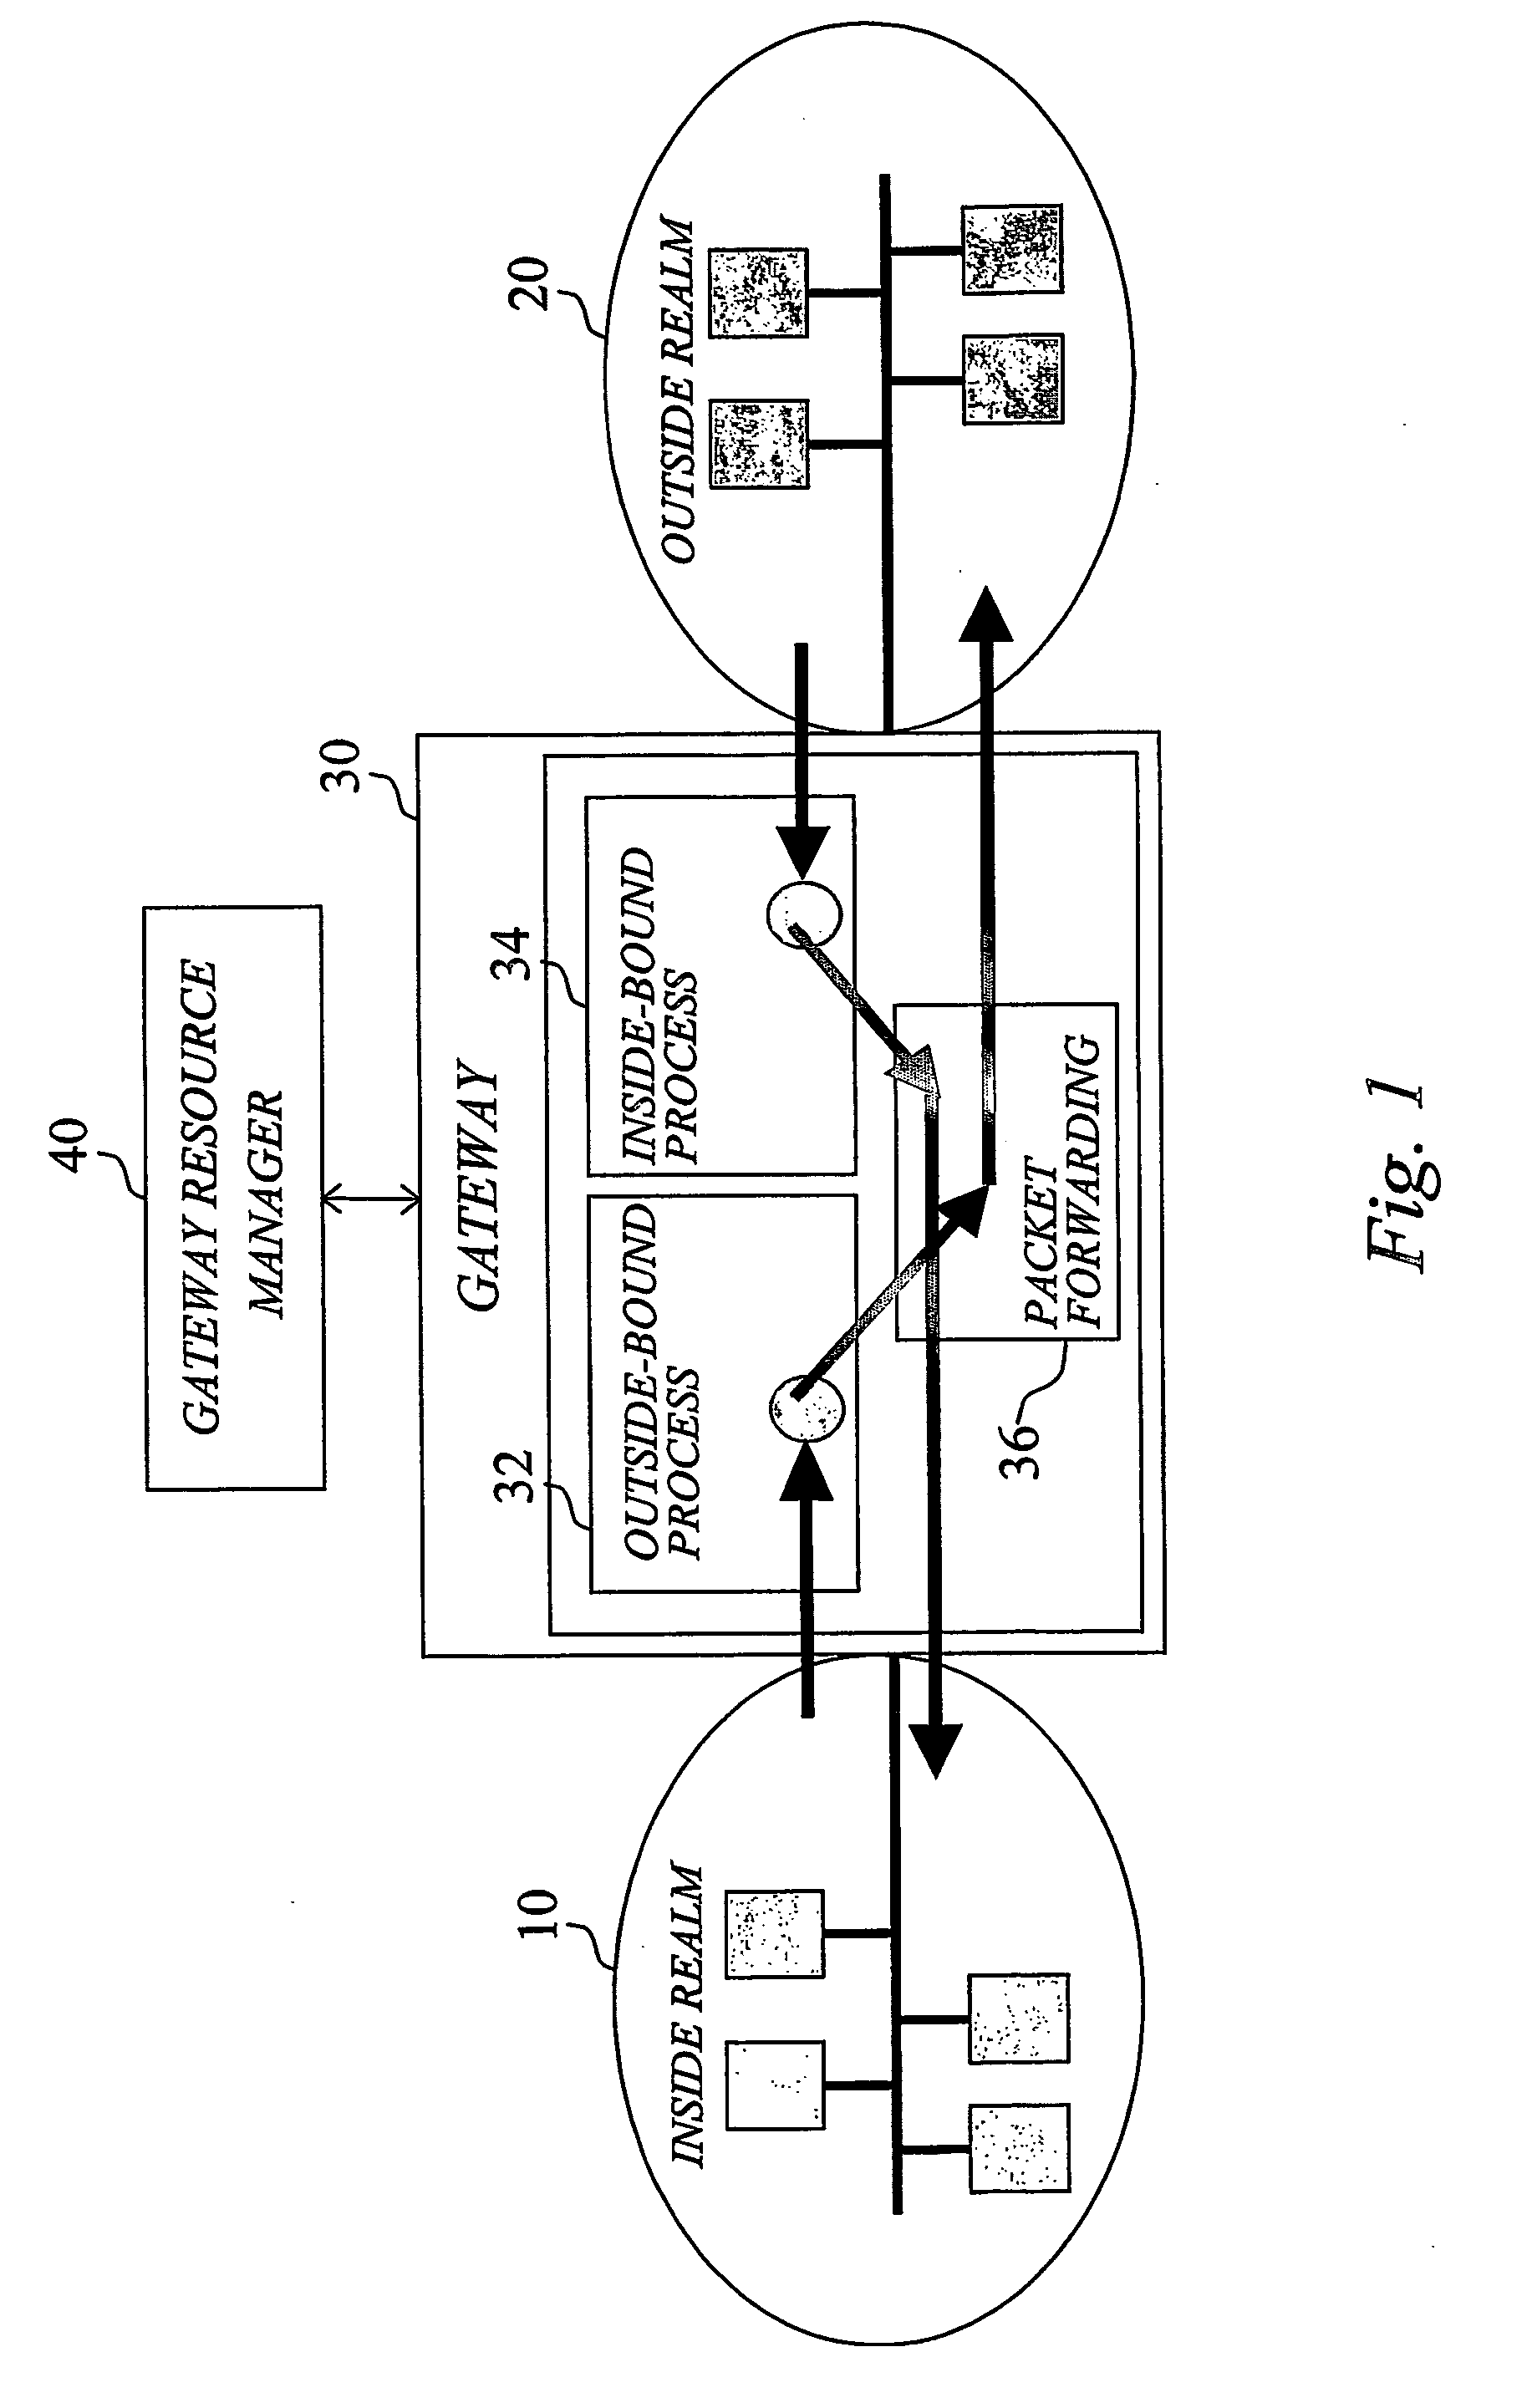 Method and system for centrally allocating addresses and port numbers